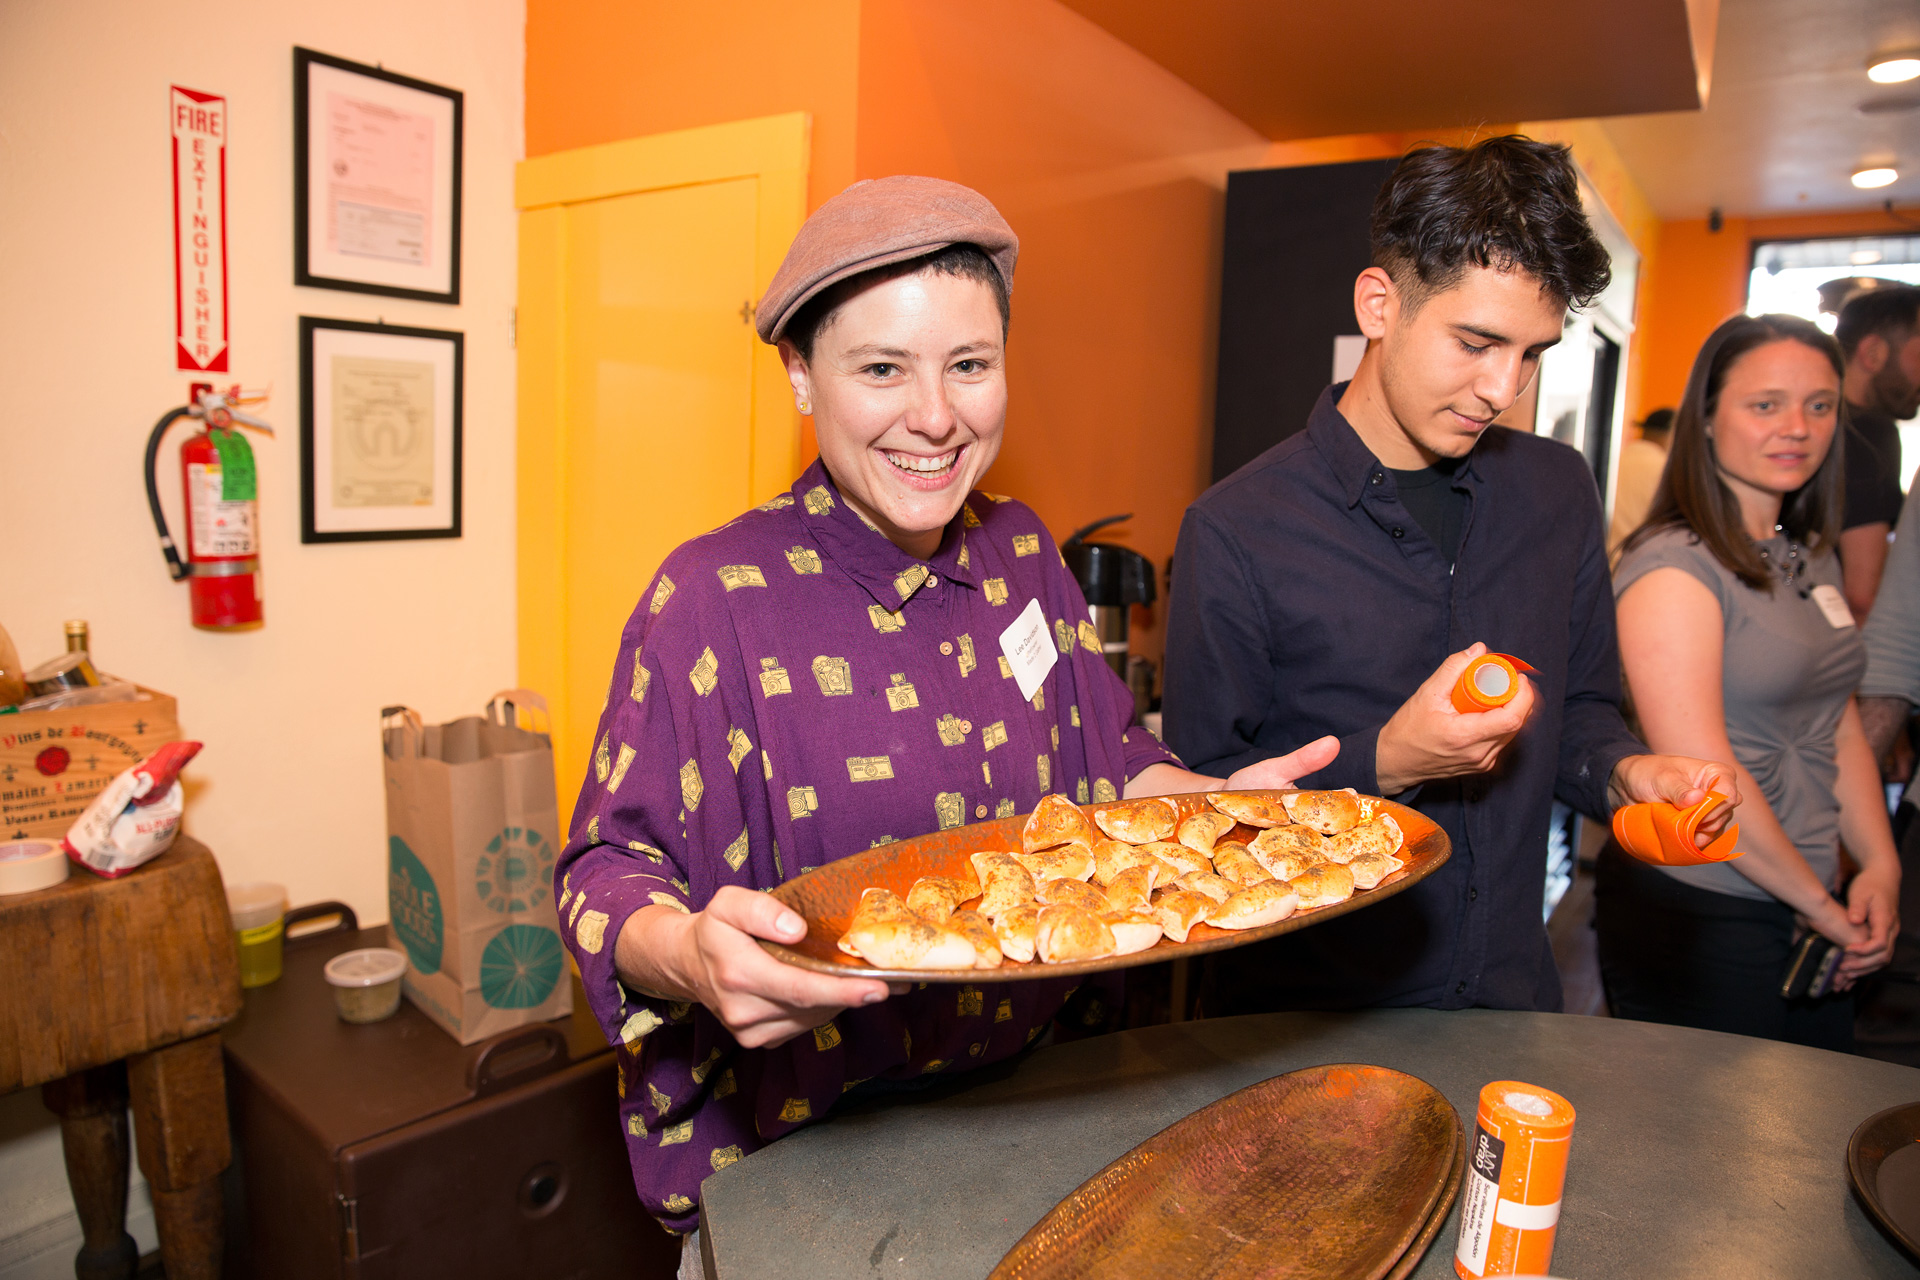 Chef Lee Davidson with a plate of the finished fatayers, a savory pastry commonly served in the Arab world (and Israel, where she spent her teen years.